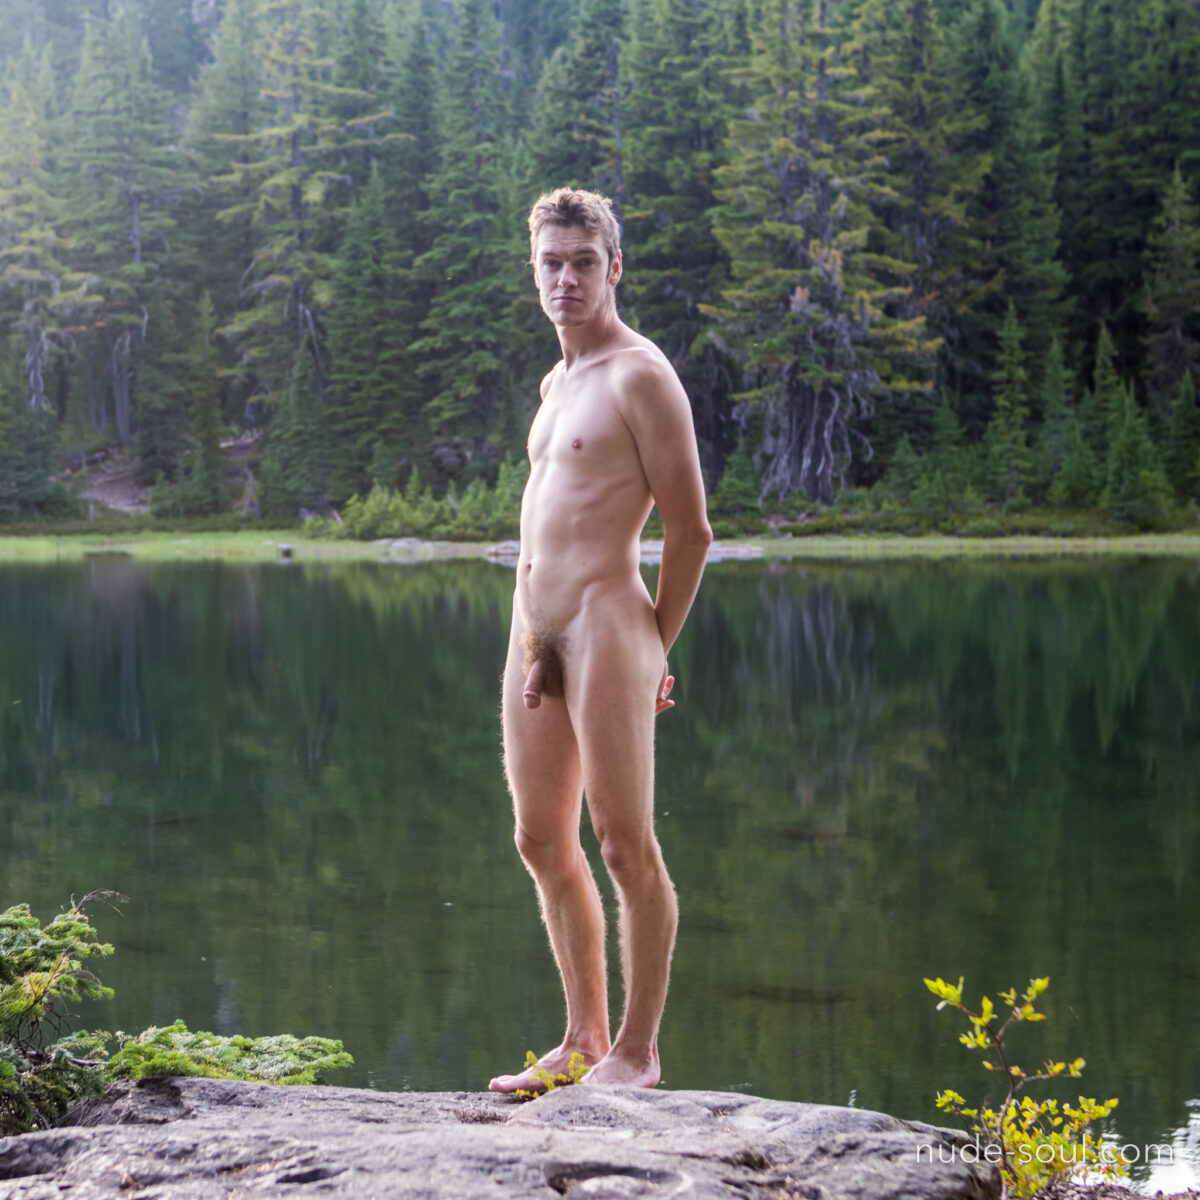 clinton monteiro recommends just naked men tumblr pic